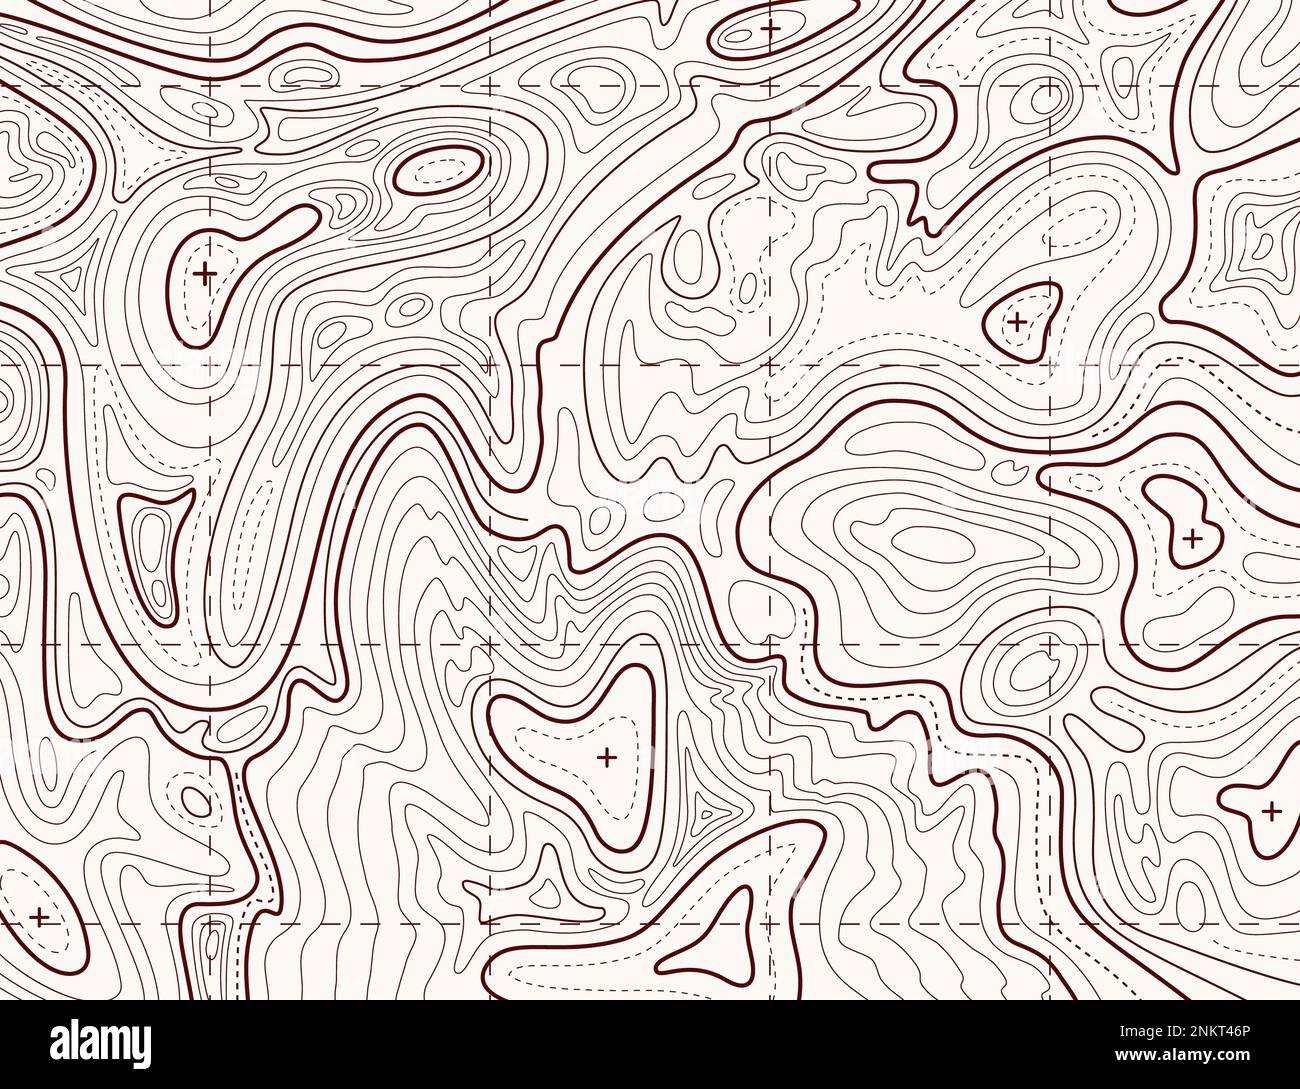 Topographic map. Trail mapping grid, contour terrain relief line texture. Cartography vector concept Stock Photo